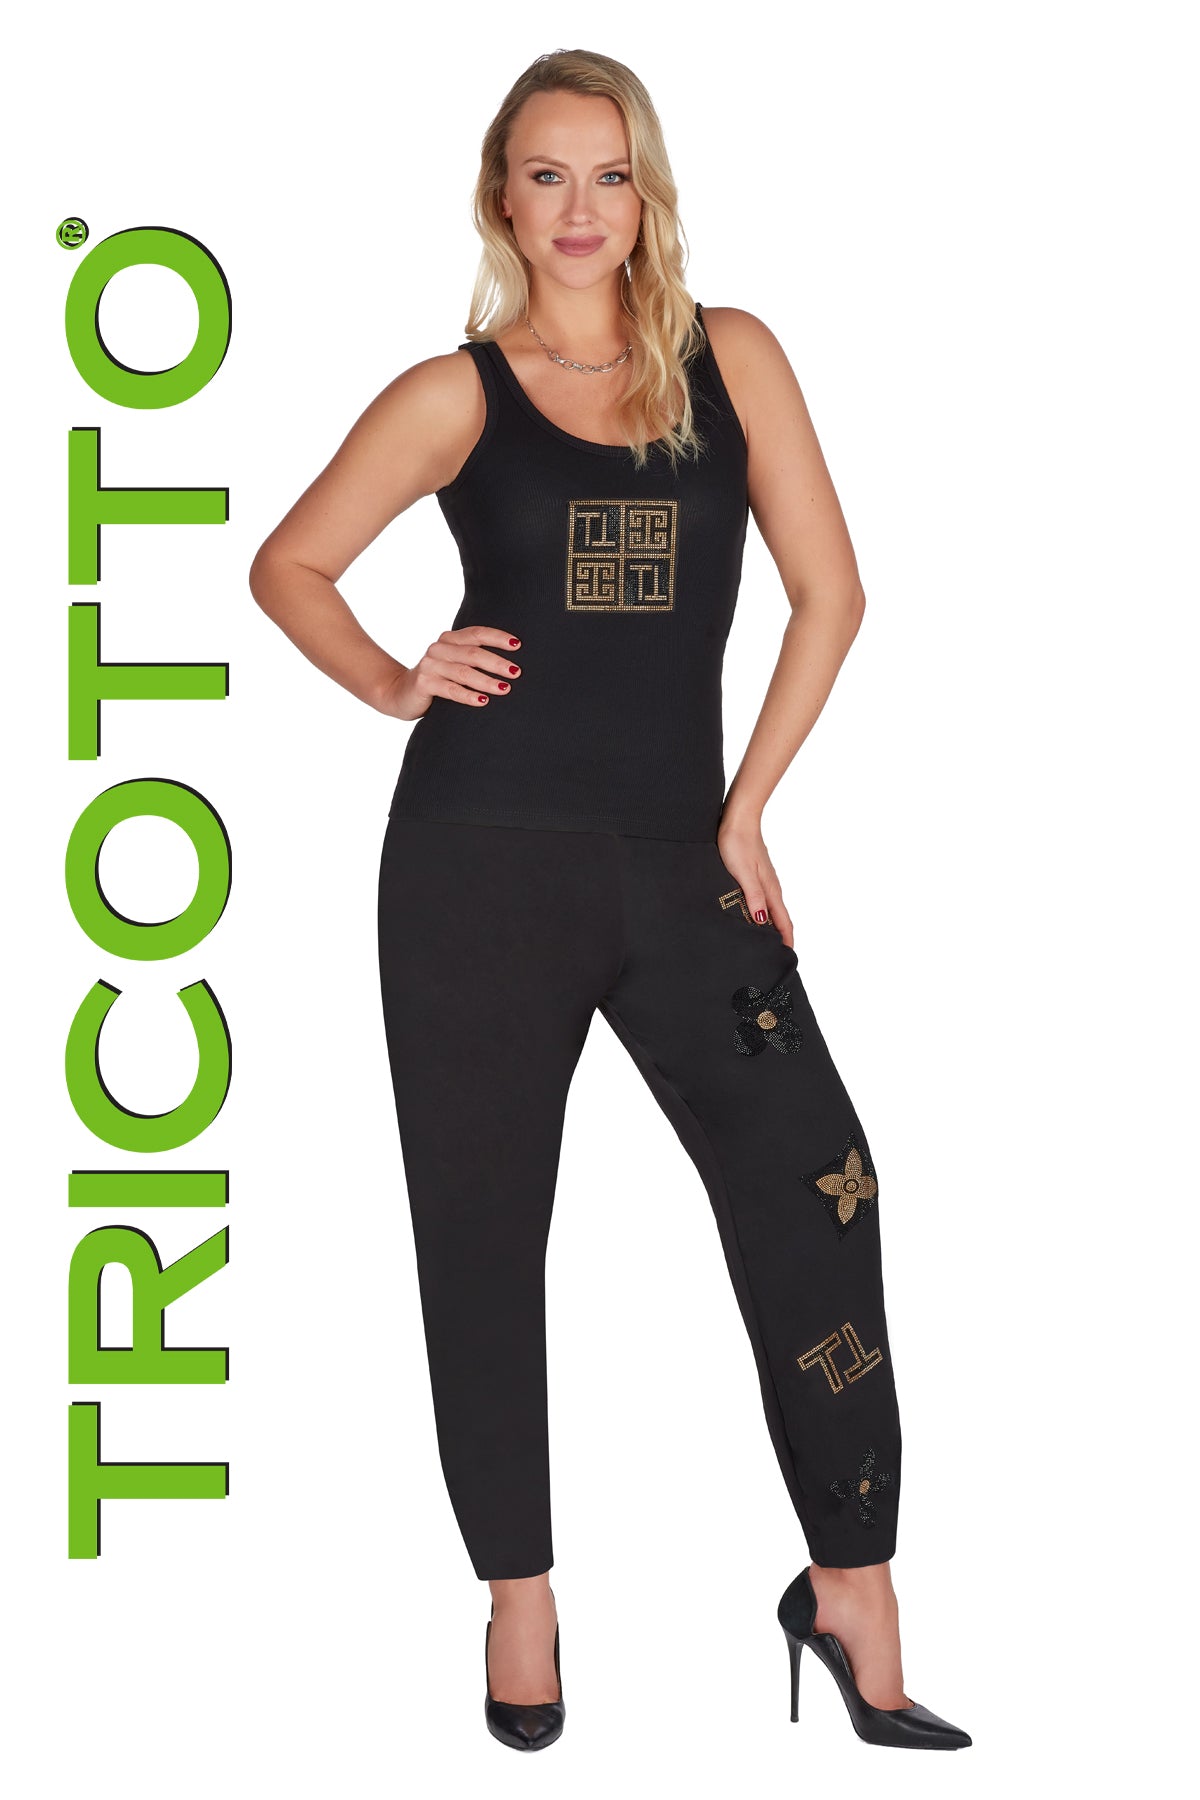 Tricotto Clothing-Tricotto Online Shop-Tricotto Camisoles